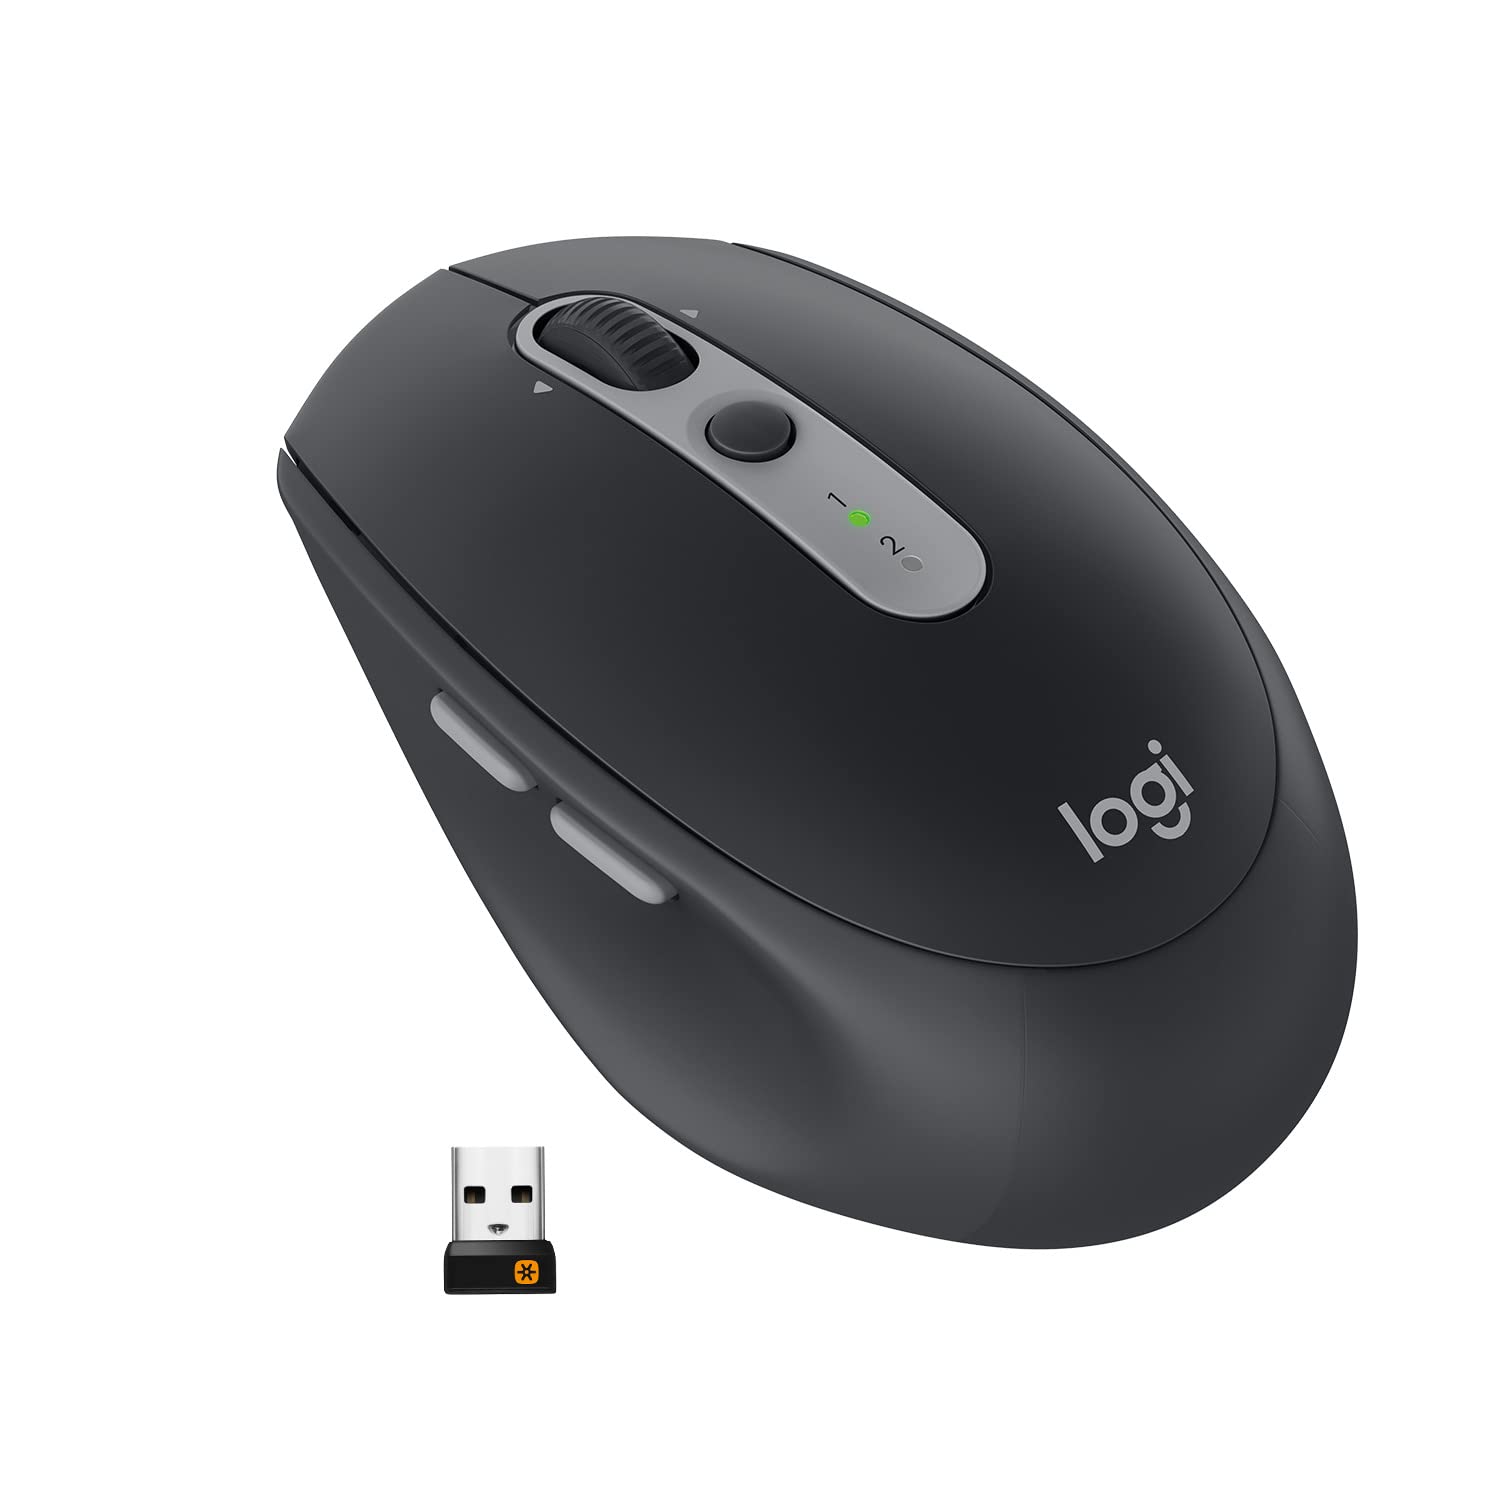 Logitech M590 Multi-Device Silent Wireless Mouse, Bluetooth, 2.4GHz USB Unifying Receiver, 1000 DPI Optical Tracking, 2-Year Battery, 5 Customisable Buttons, Compatible with PC, Mac, Laptop - Black